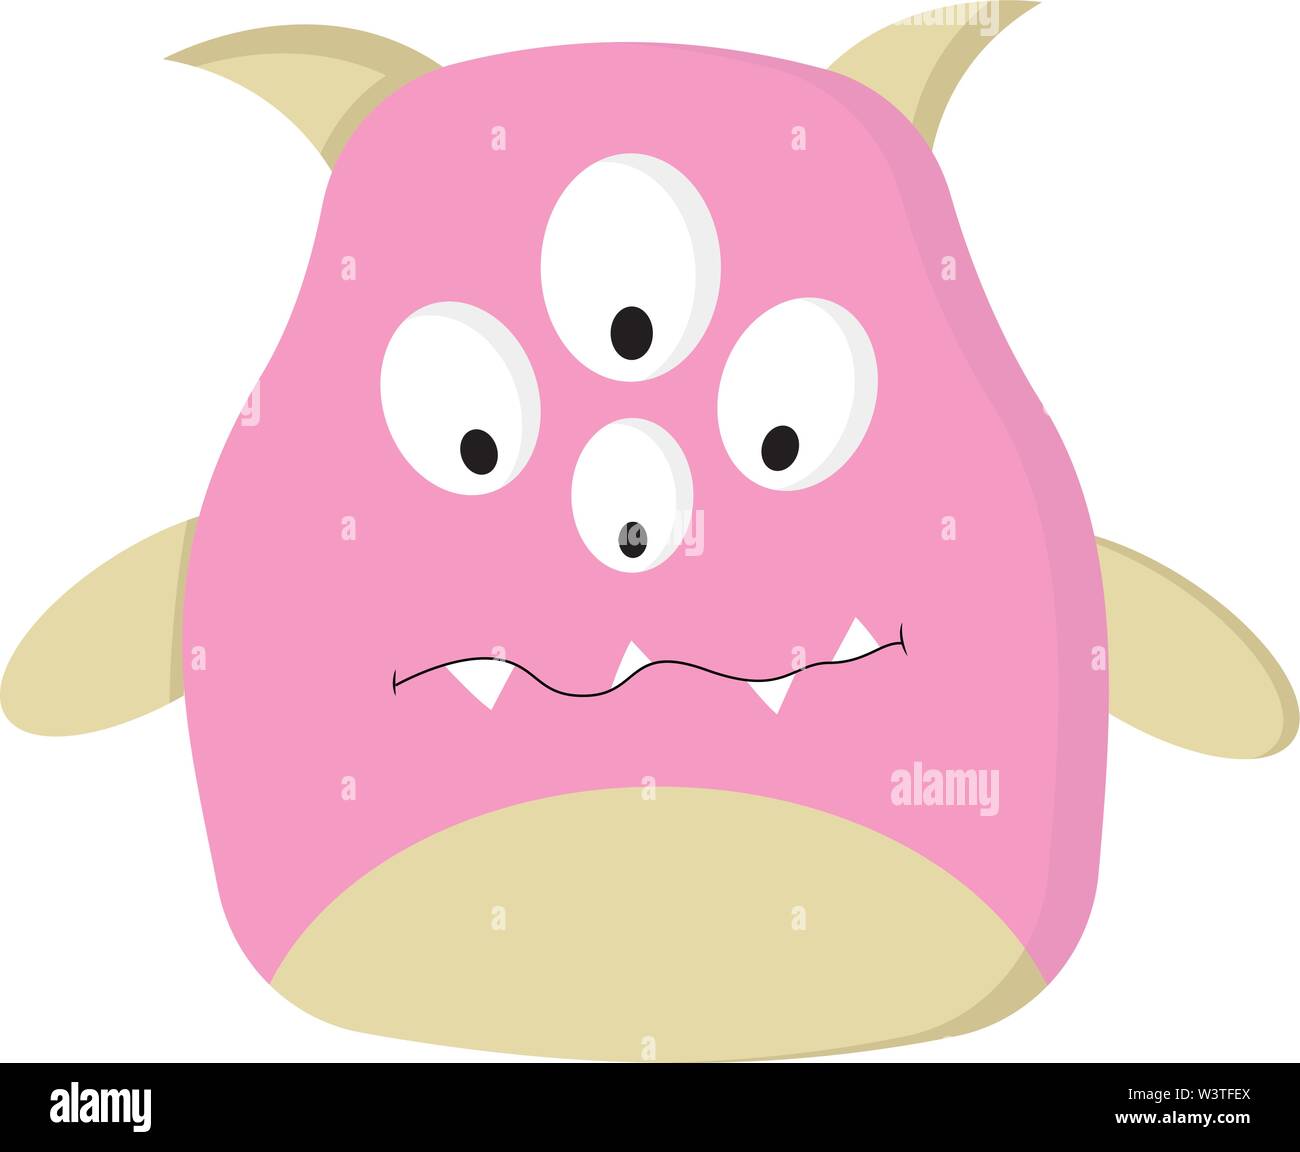 A cute monster in pink color with four eyes, vector, color drawing or illustration. Stock Vector